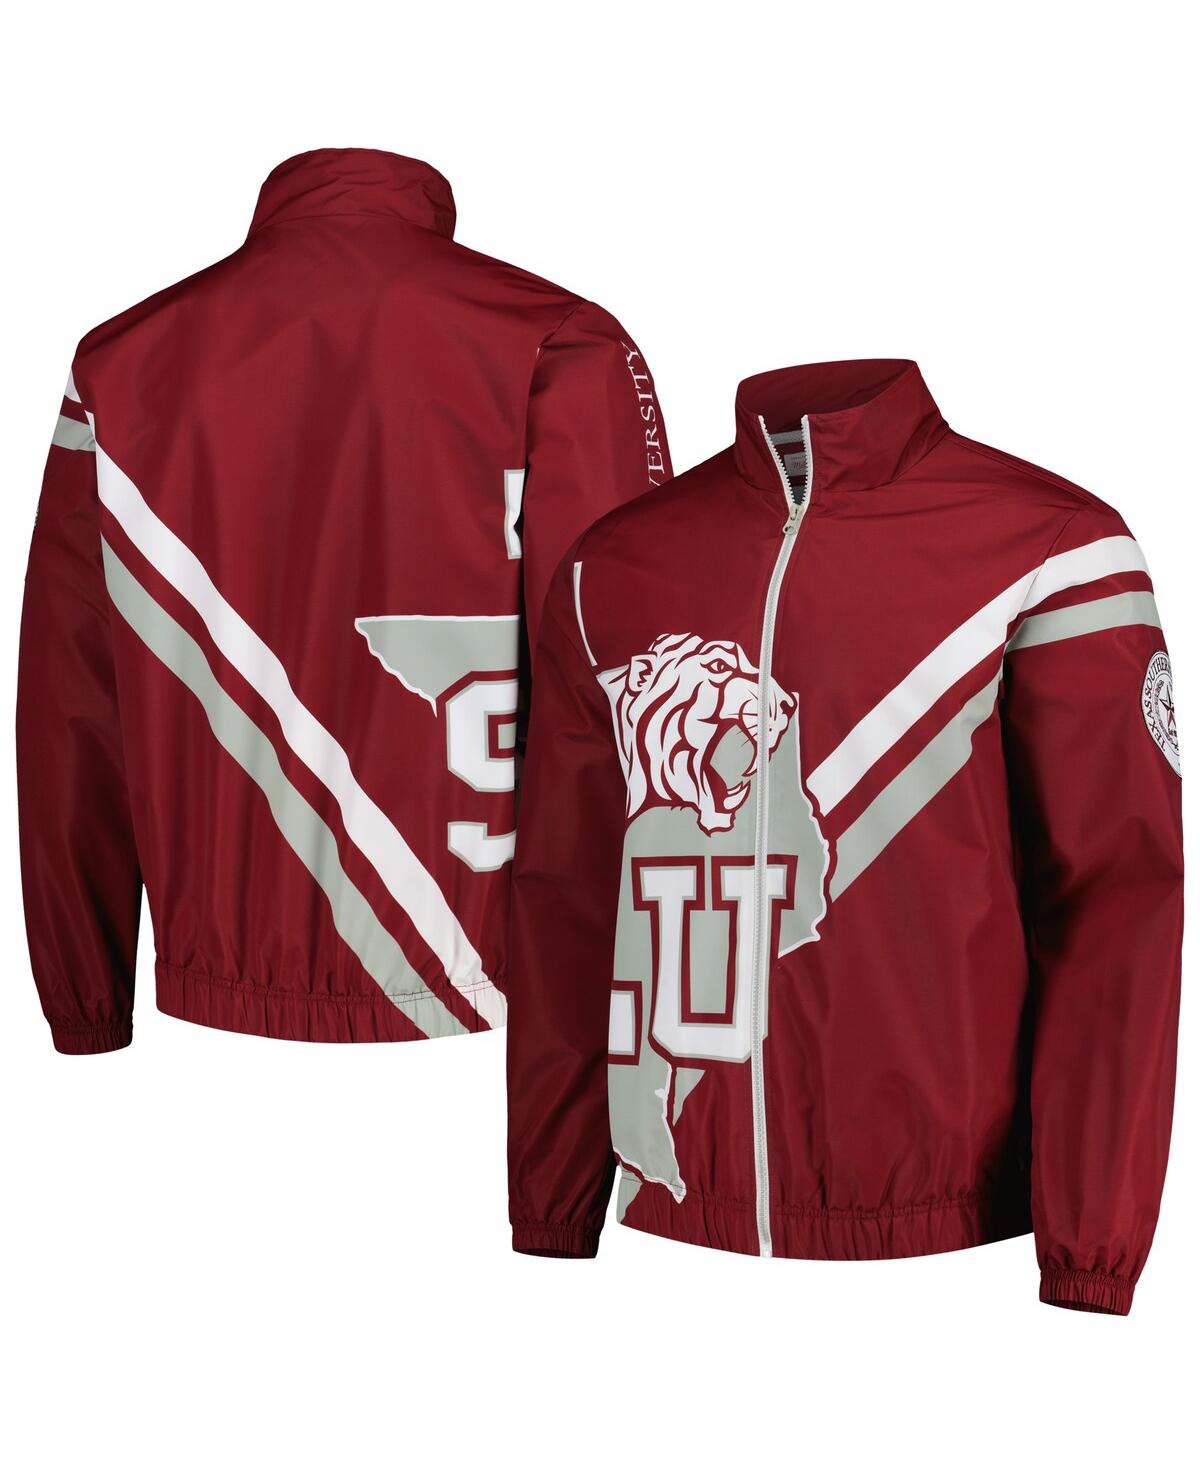 Shop Mitchell & Ness Men's  Maroon Texas Southern Tigers Exploded Logo Warm Up Full-zip Jacket